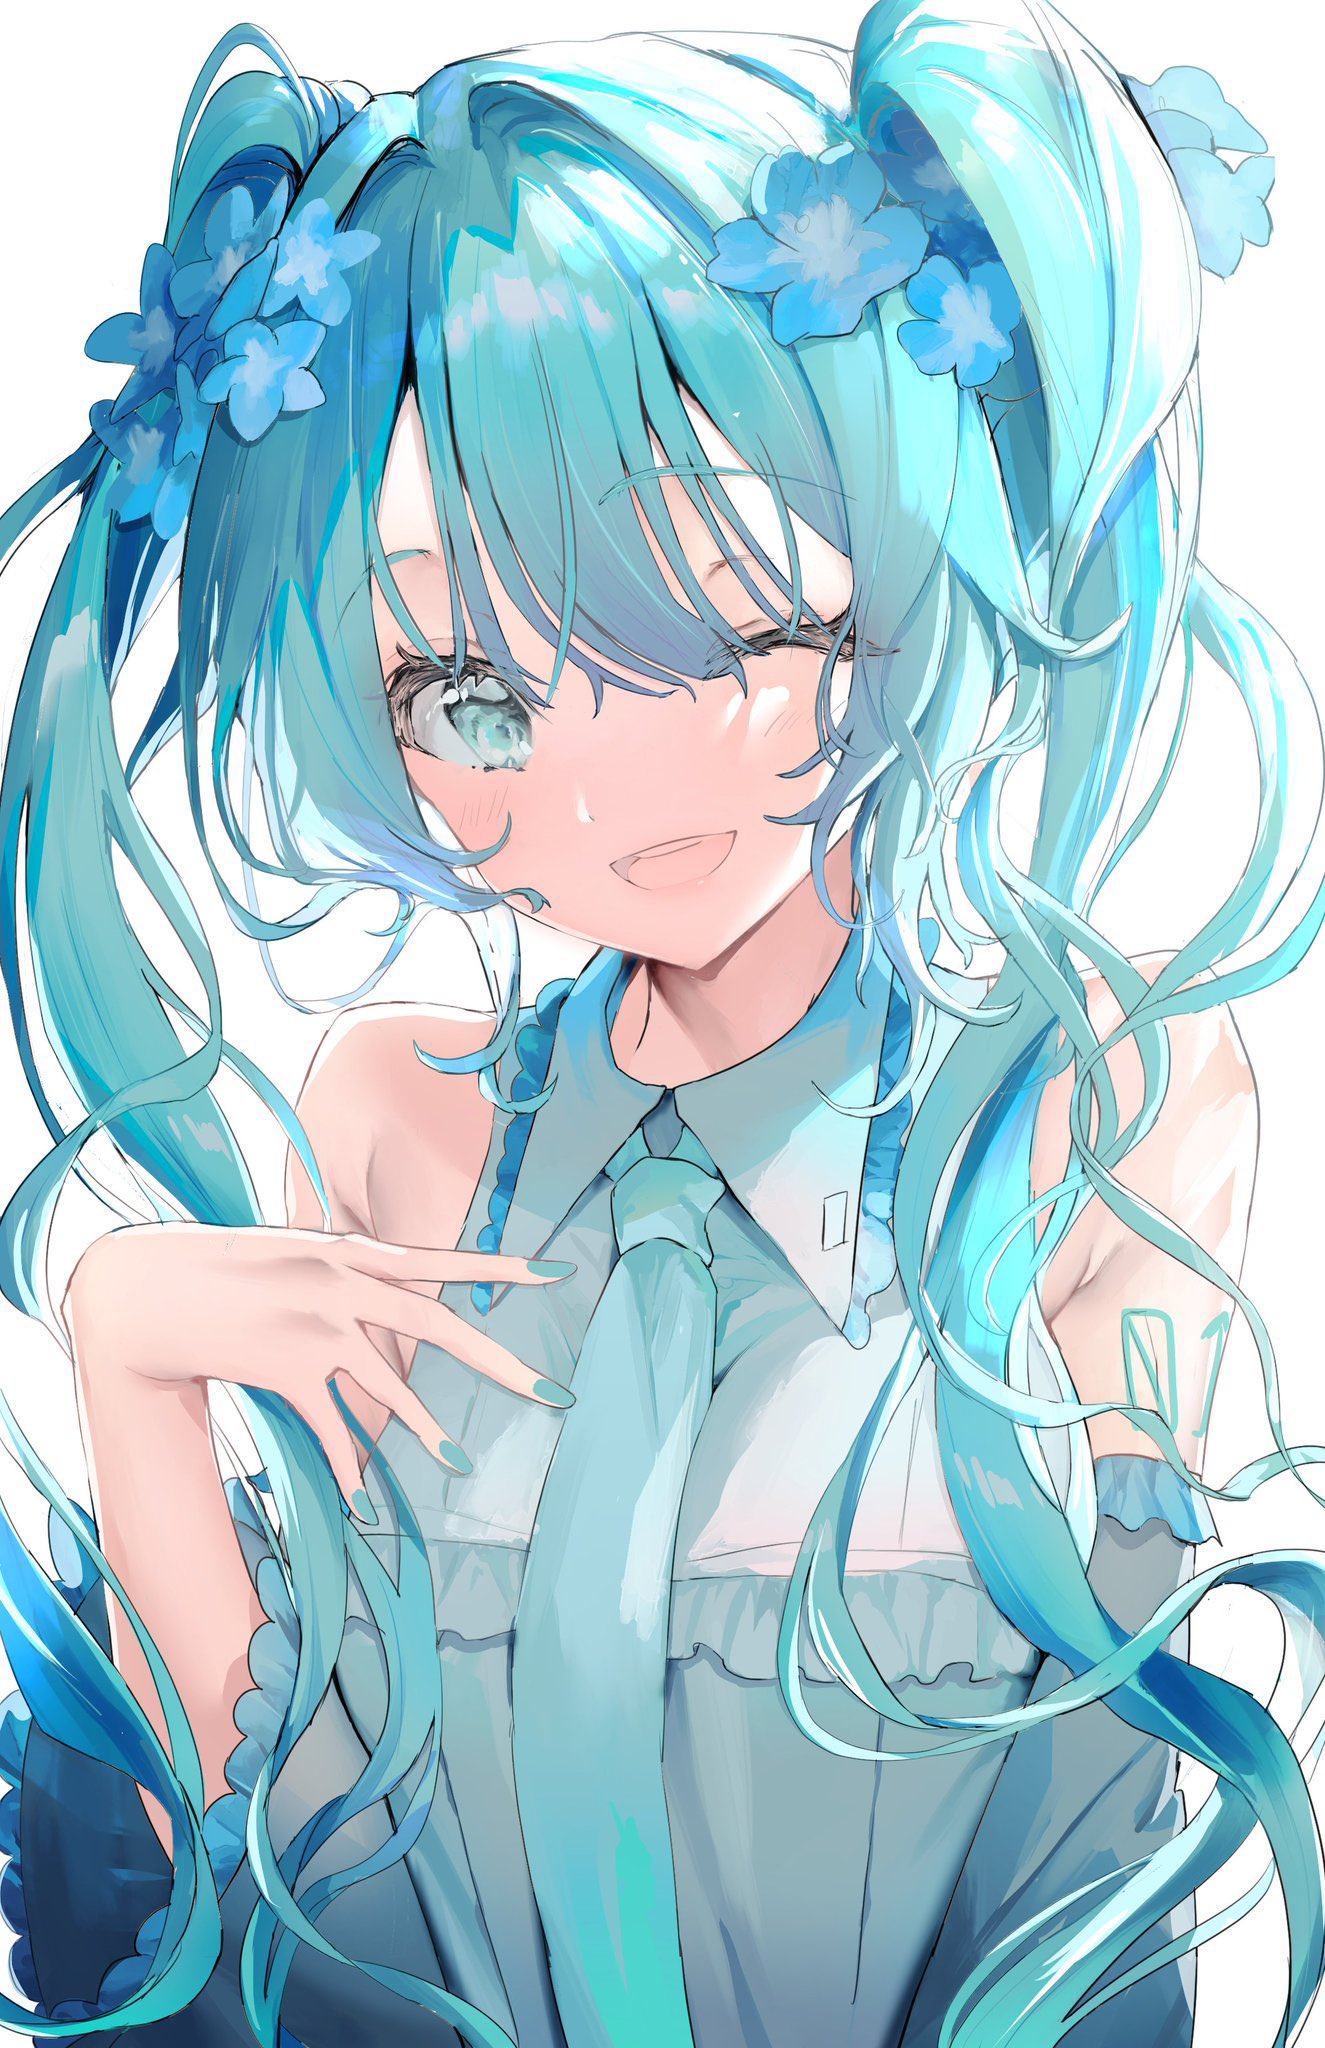 00nanona 1girl bangs bare_shoulders blush flower green_eyes green_hair hair_flower hair_ornament hatsune_miku highres long_hair looking_at_viewer open_mouth smile twintails twintails_day vocaloid white_background